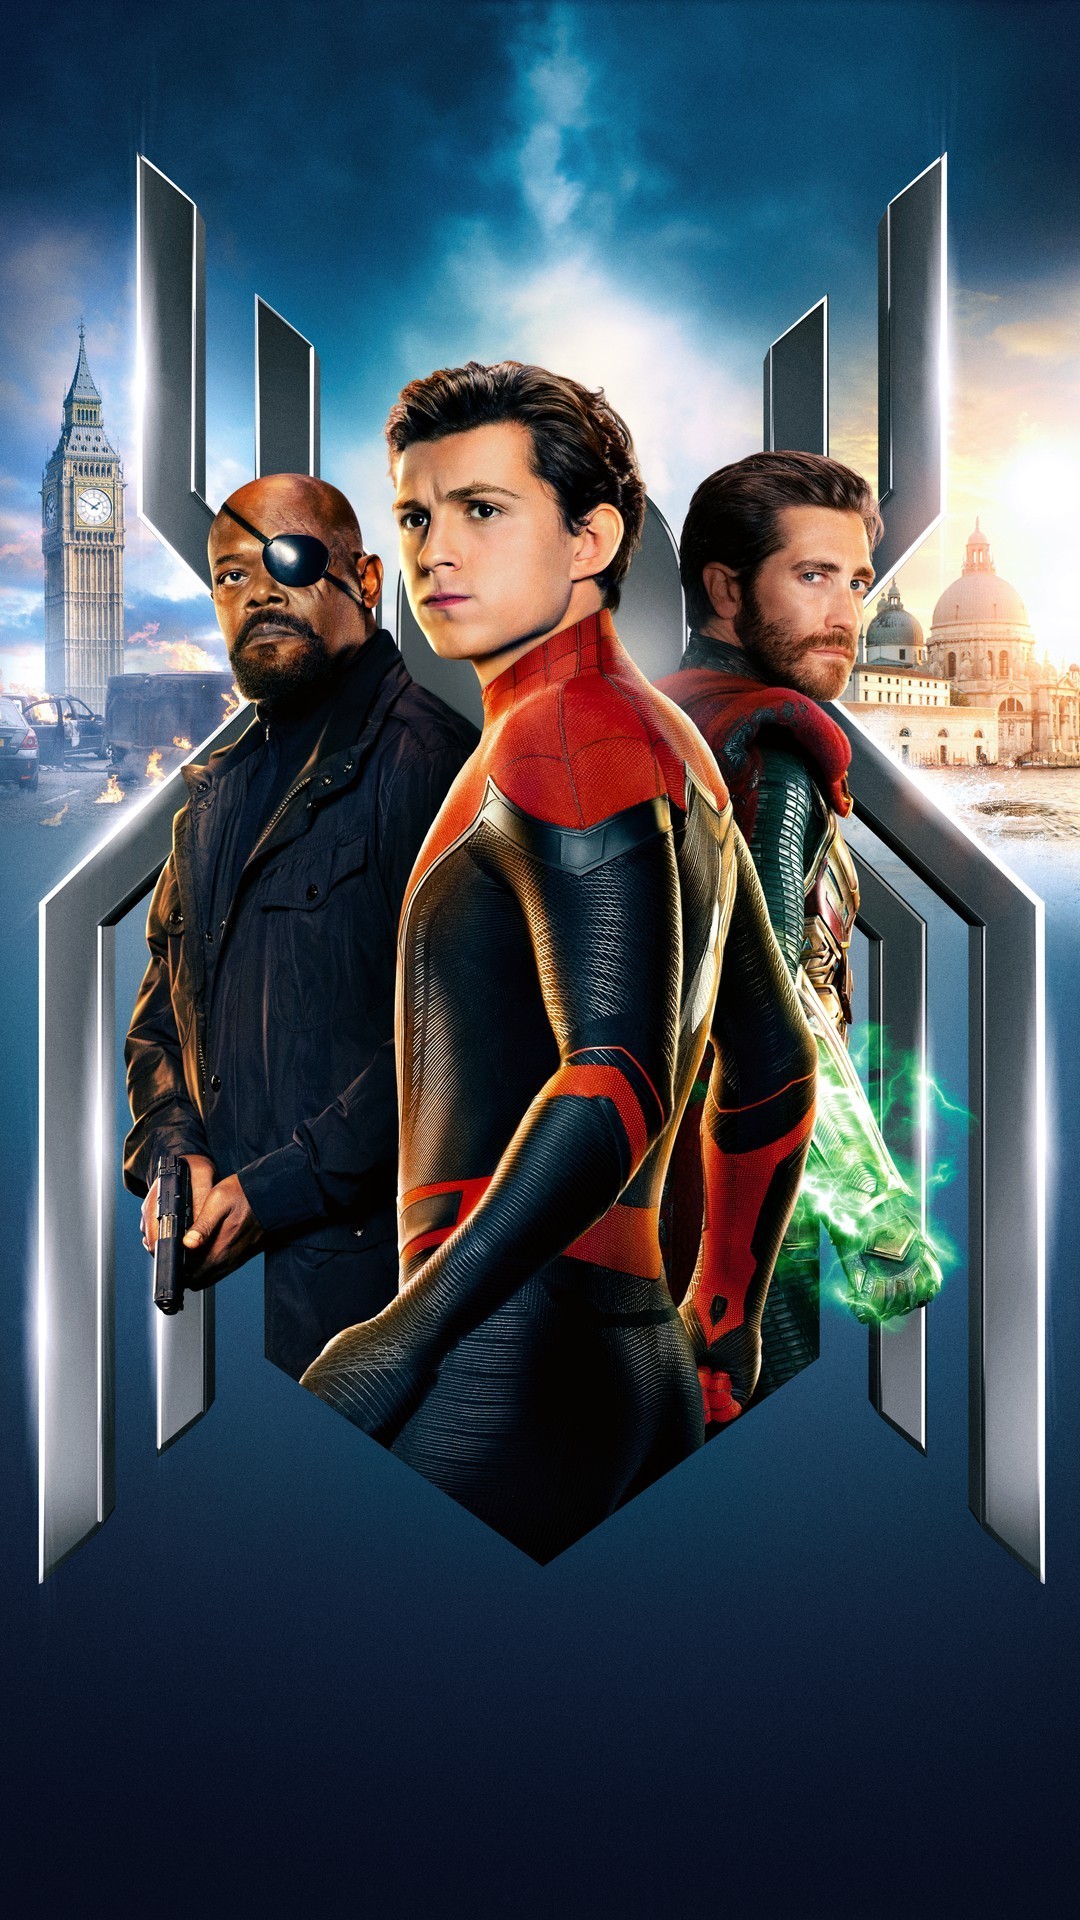 Spider-Man Far From Home Wallpaper Android with high-resolution 1080x1920 pixel. You can use this wallpaper for your Android backgrounds, Tablet, Samsung Screensavers, Mobile Phone Lock Screen and another Smartphones device